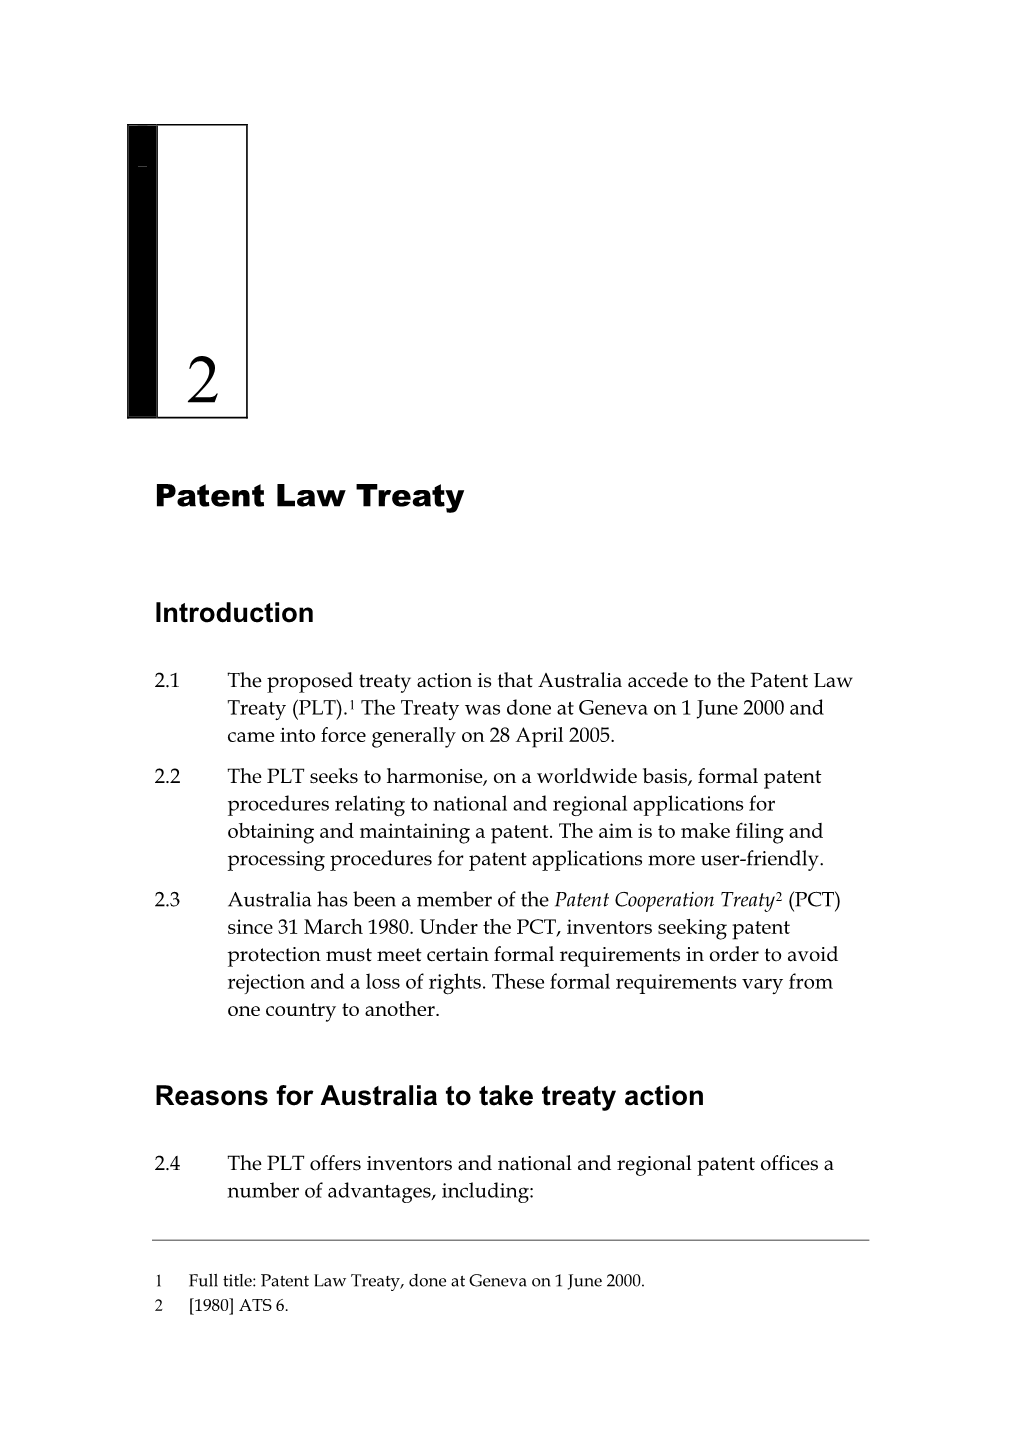 Chapter 2: Patent Law Treaty